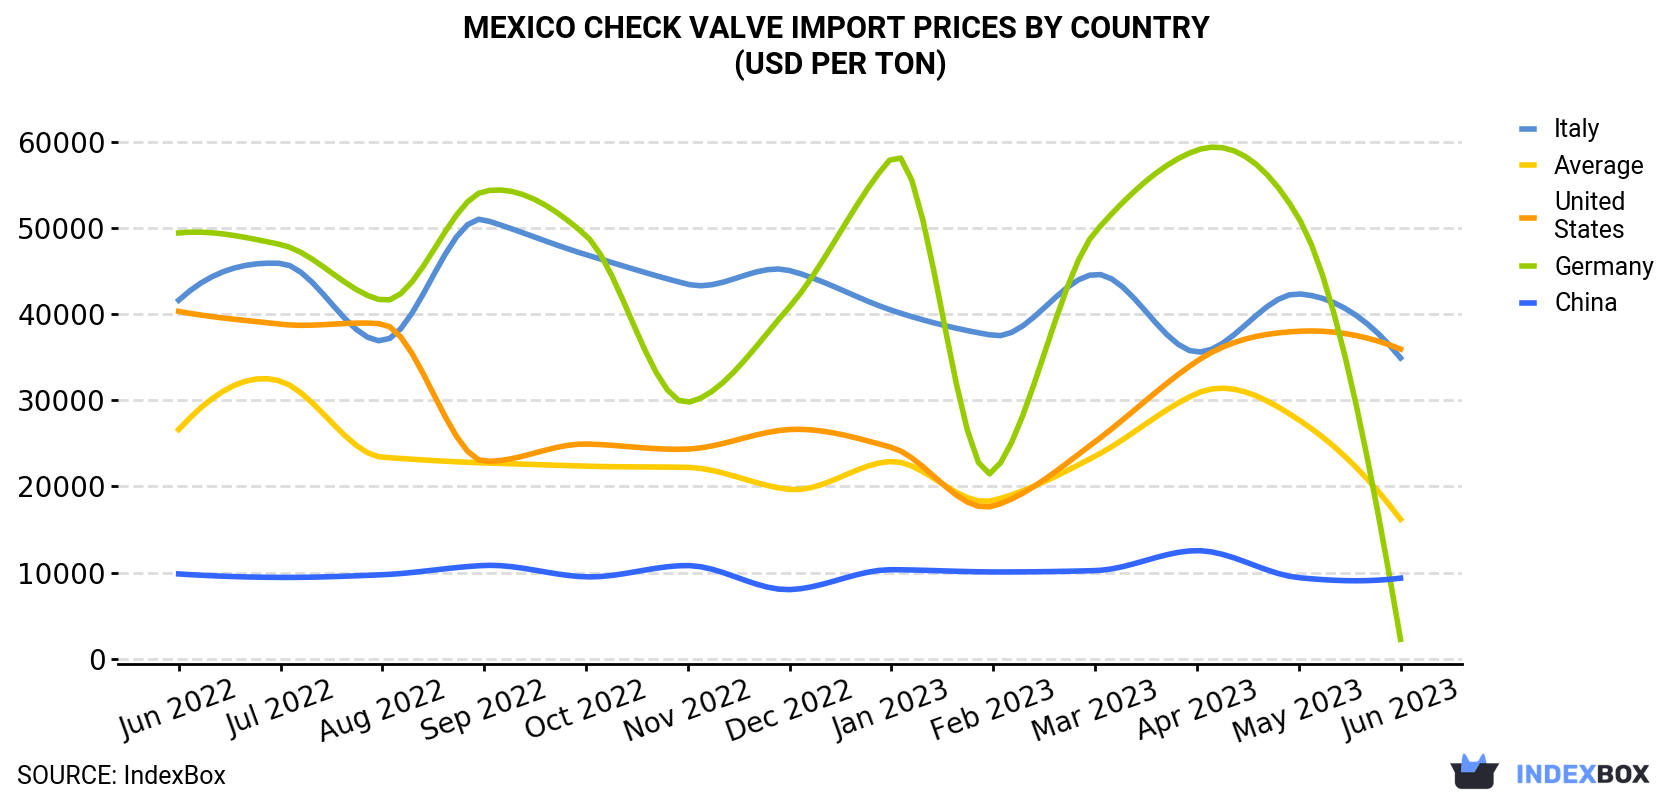 Mexico Check Valve Import Prices By Country (USD Per Ton)